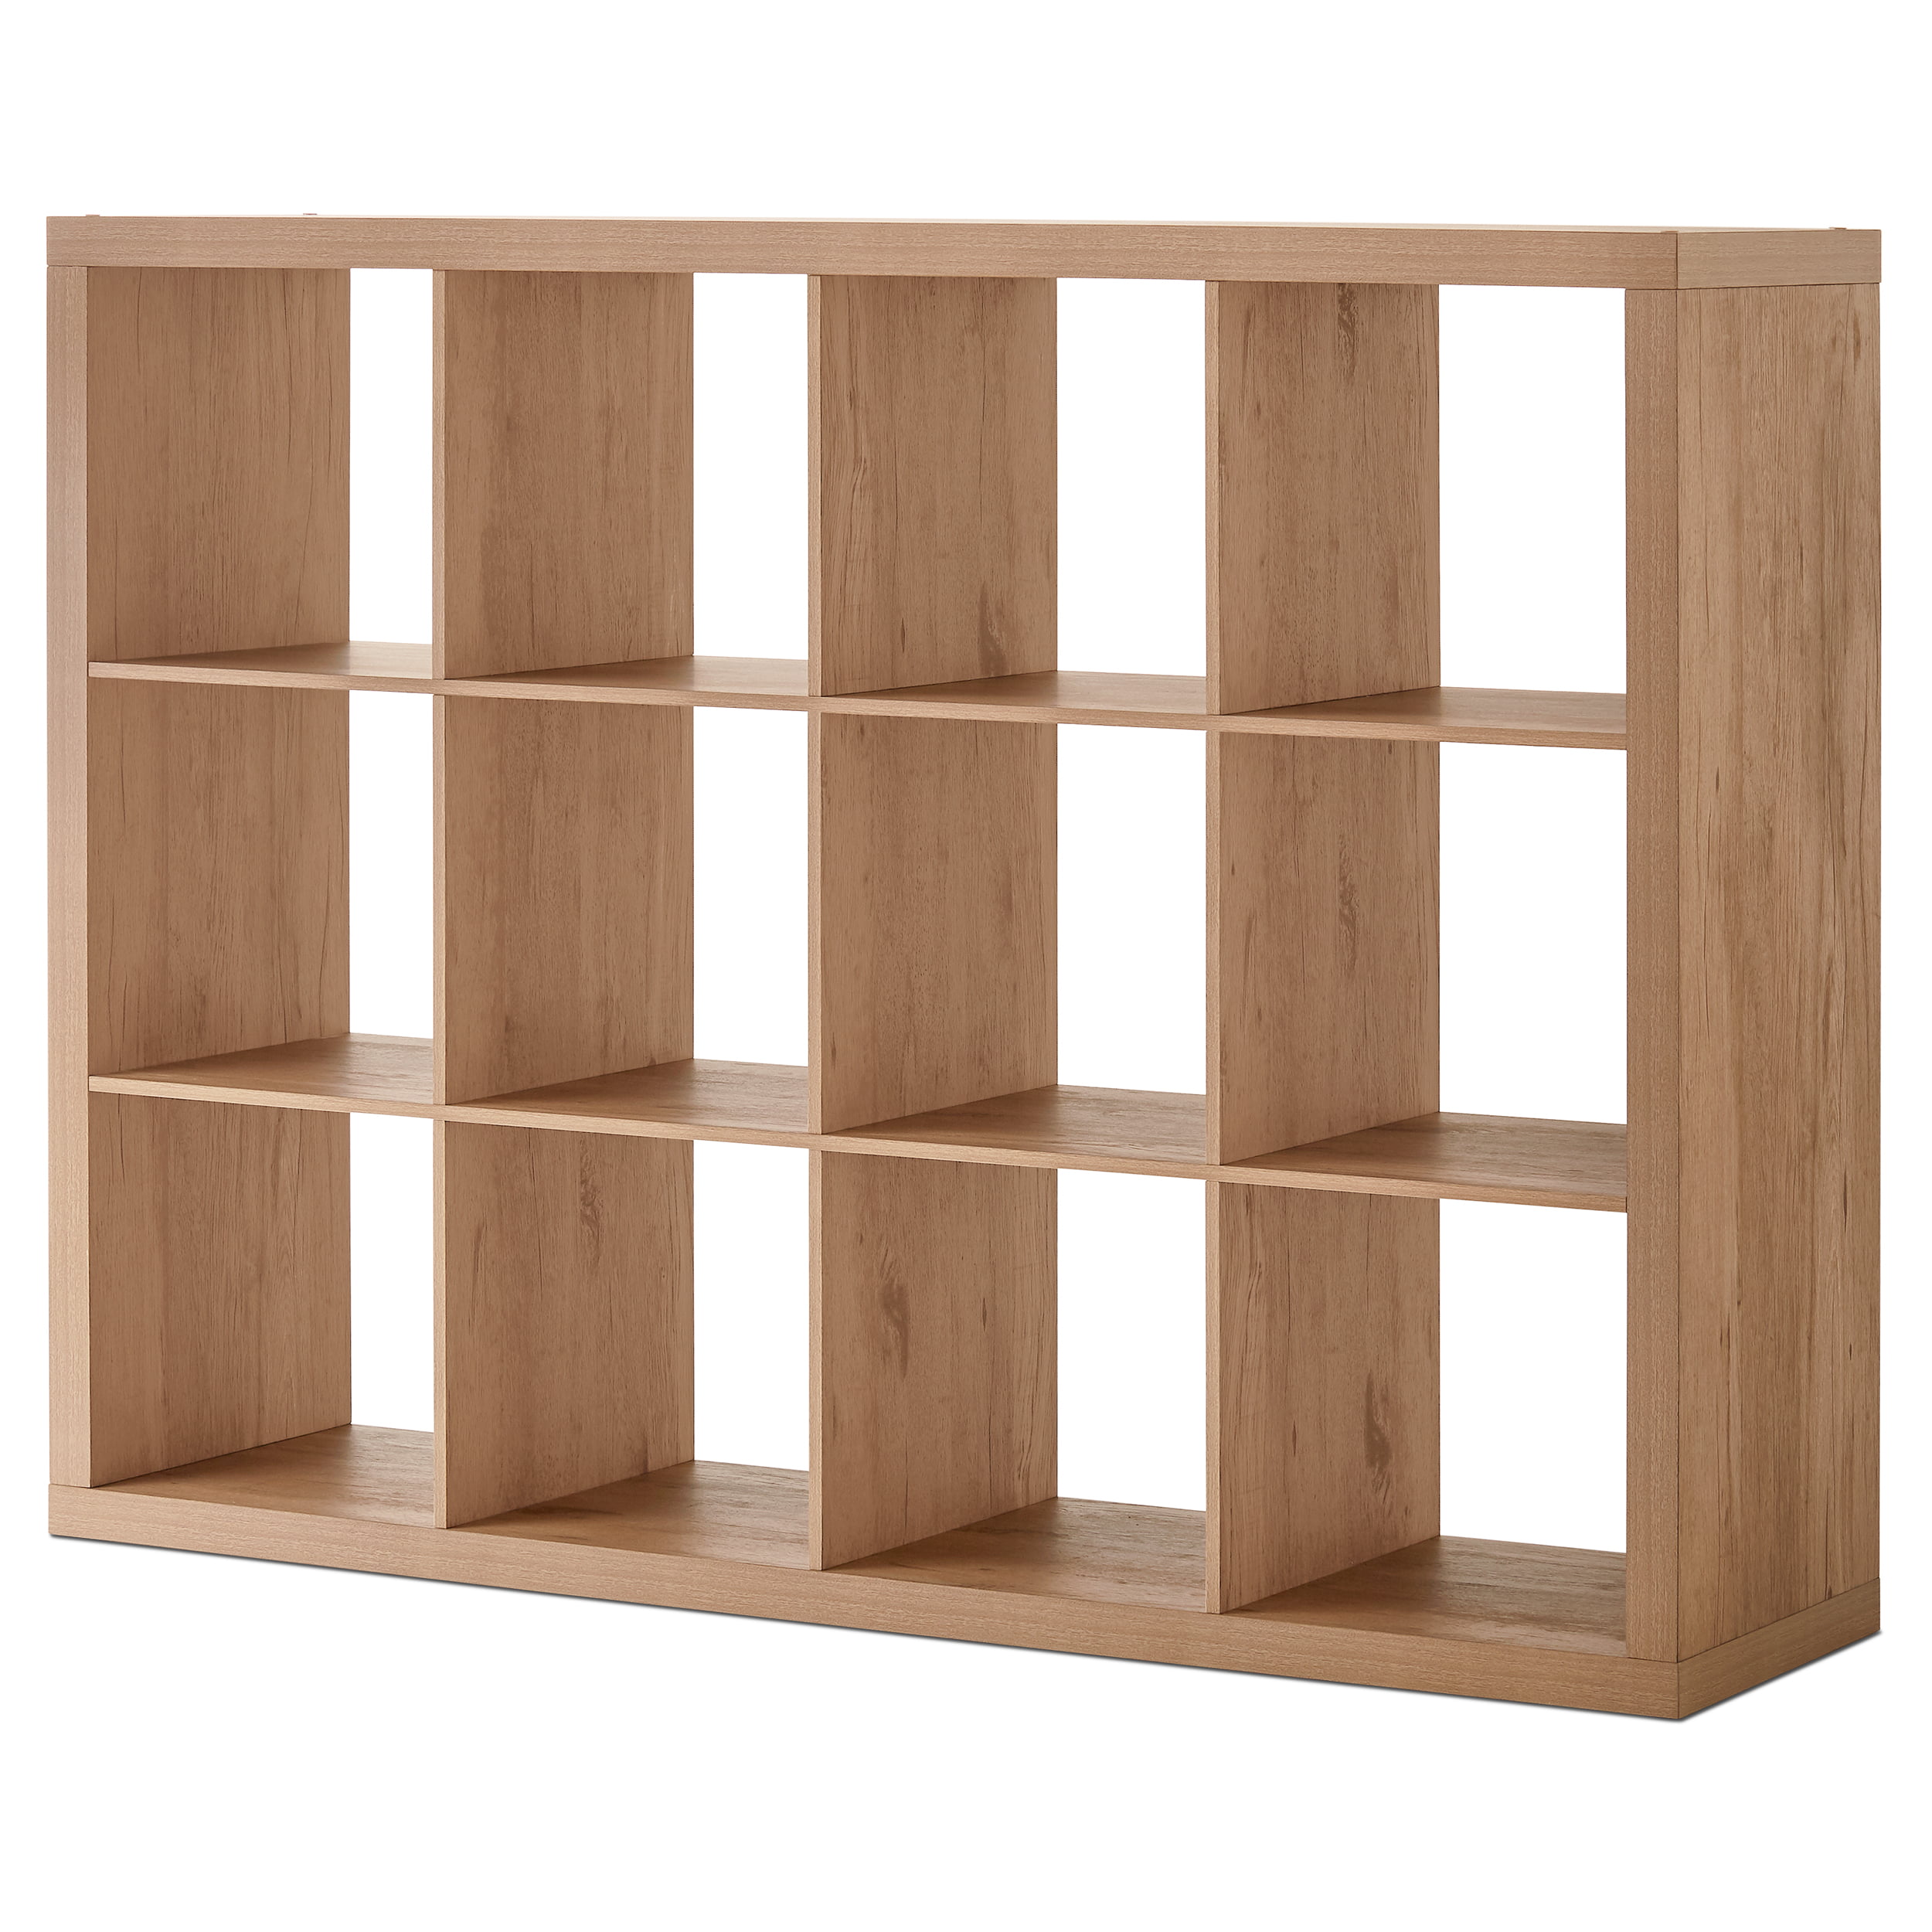 Better Homes Gardens 16 Cube Storage, Large Cube Storage Bookcase